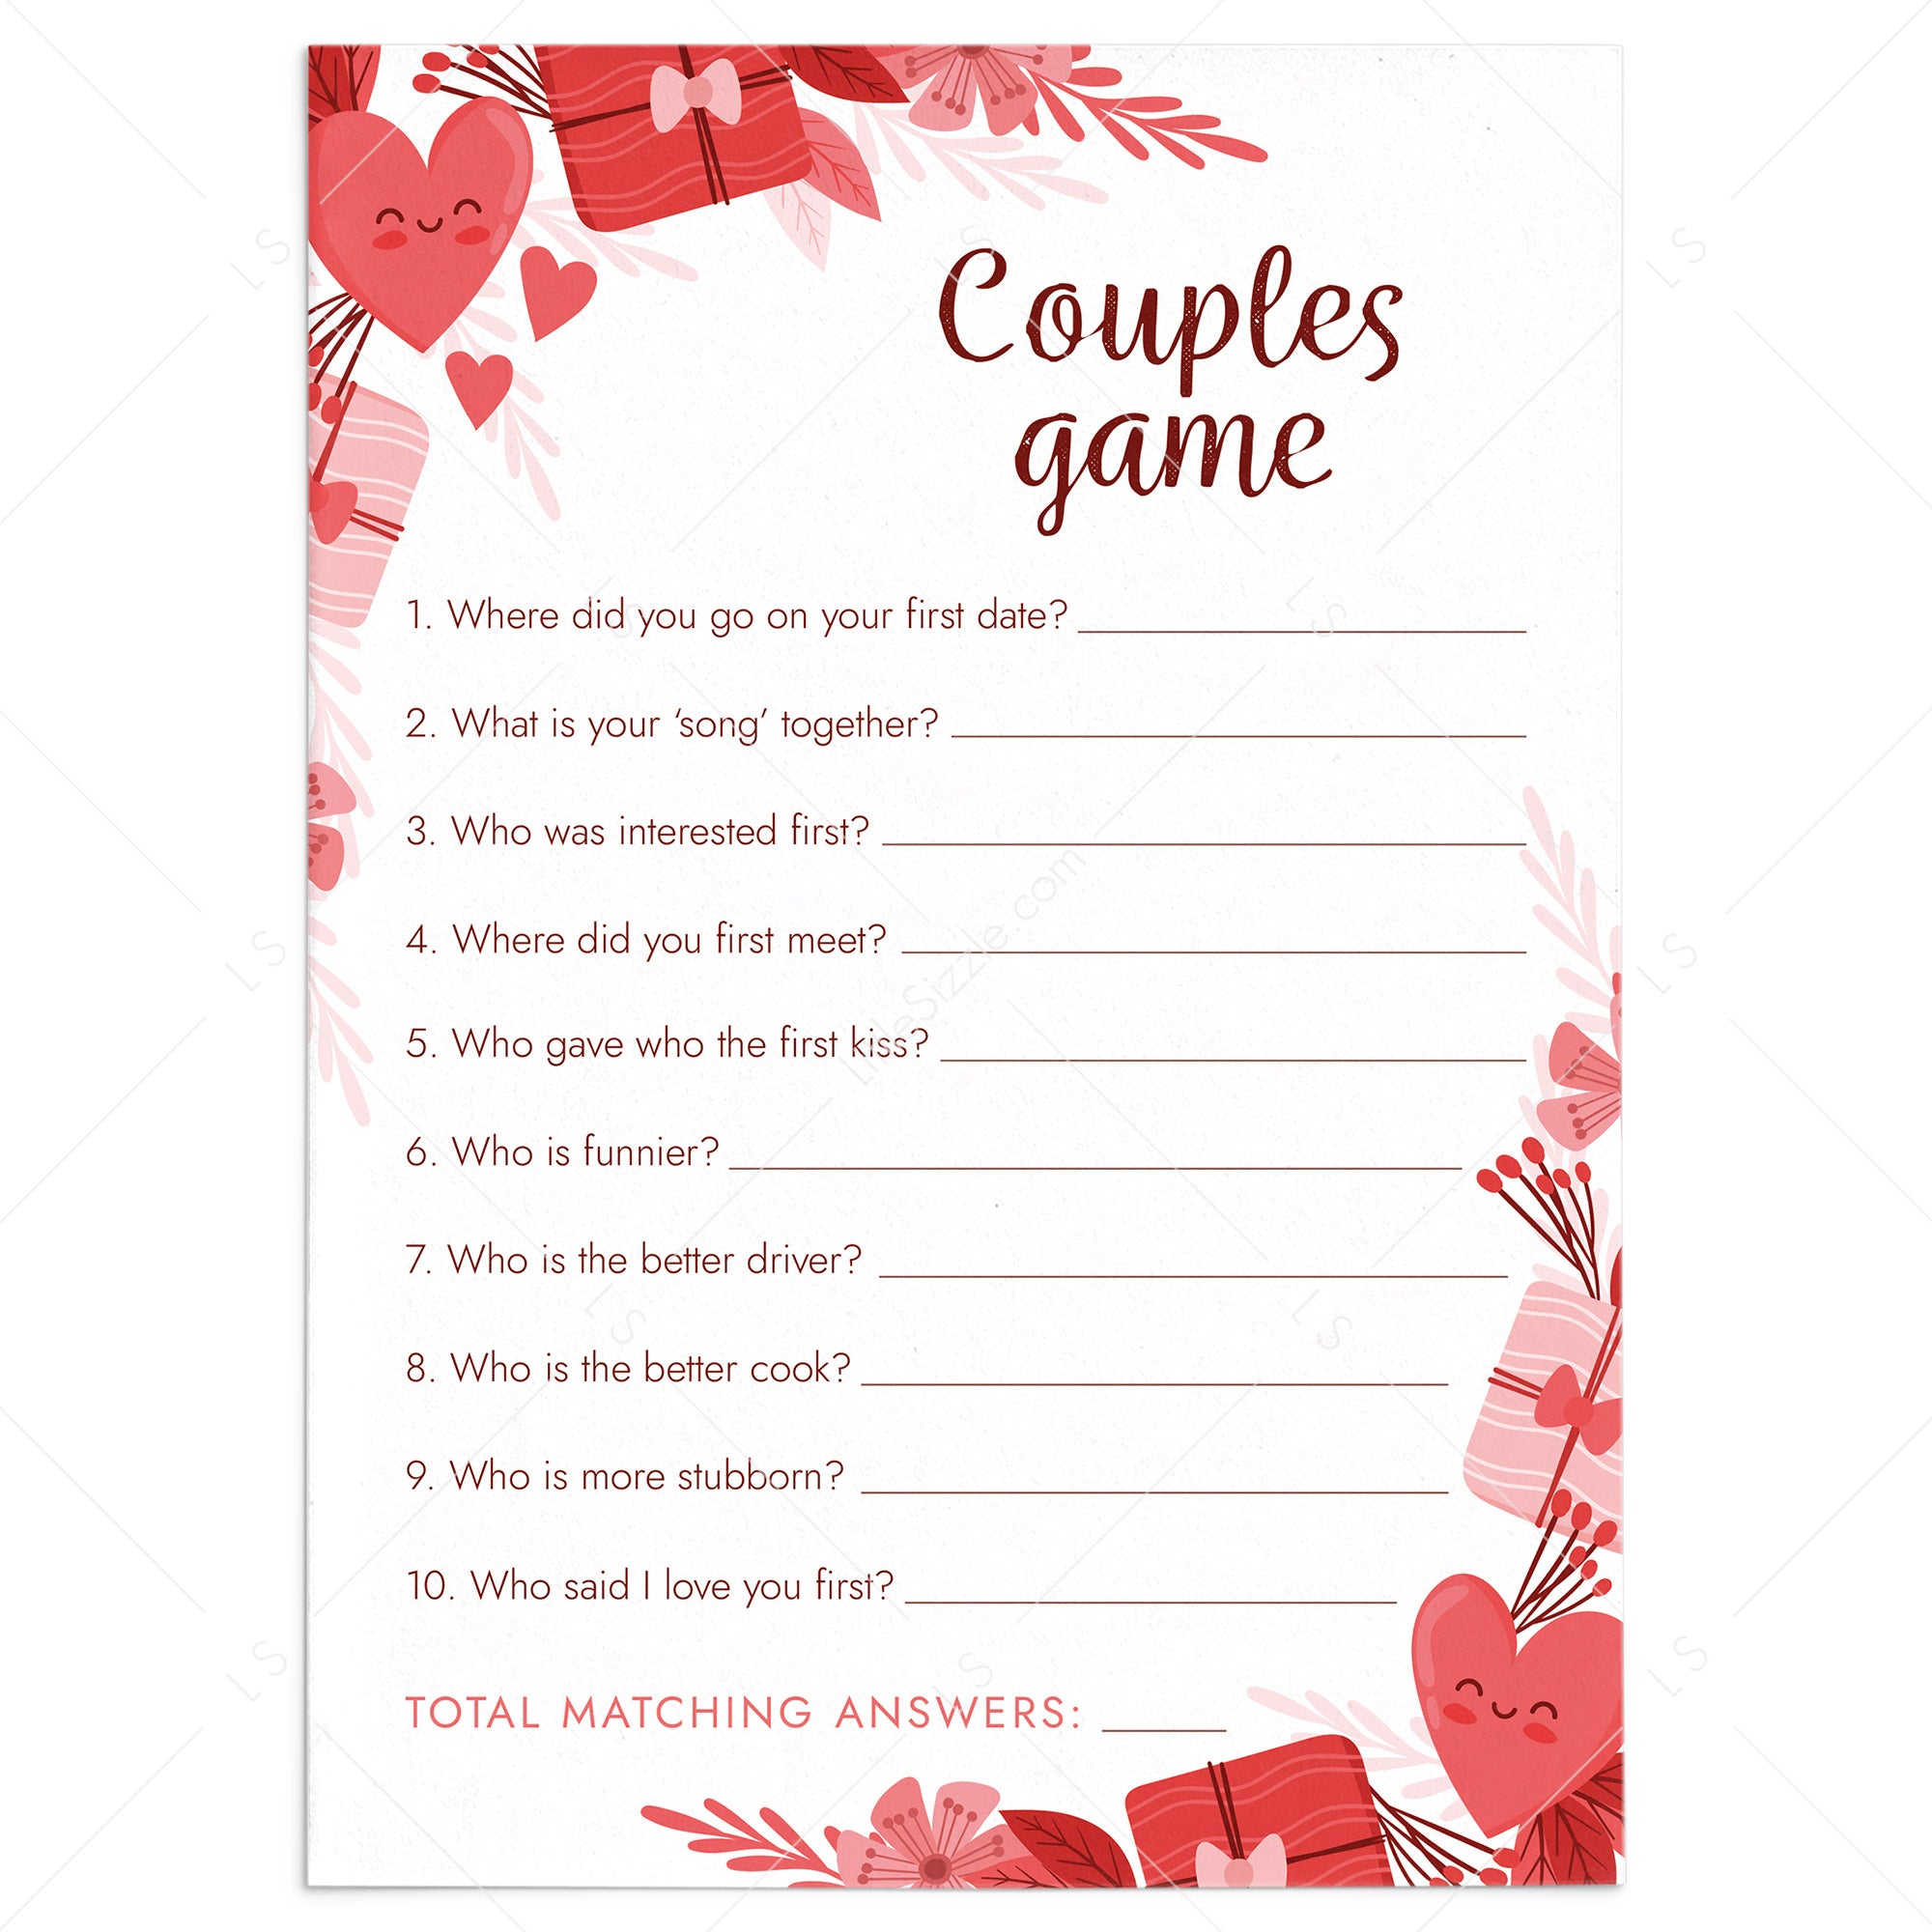 Couples Game Questions for Parties Printable by LittleSizzle